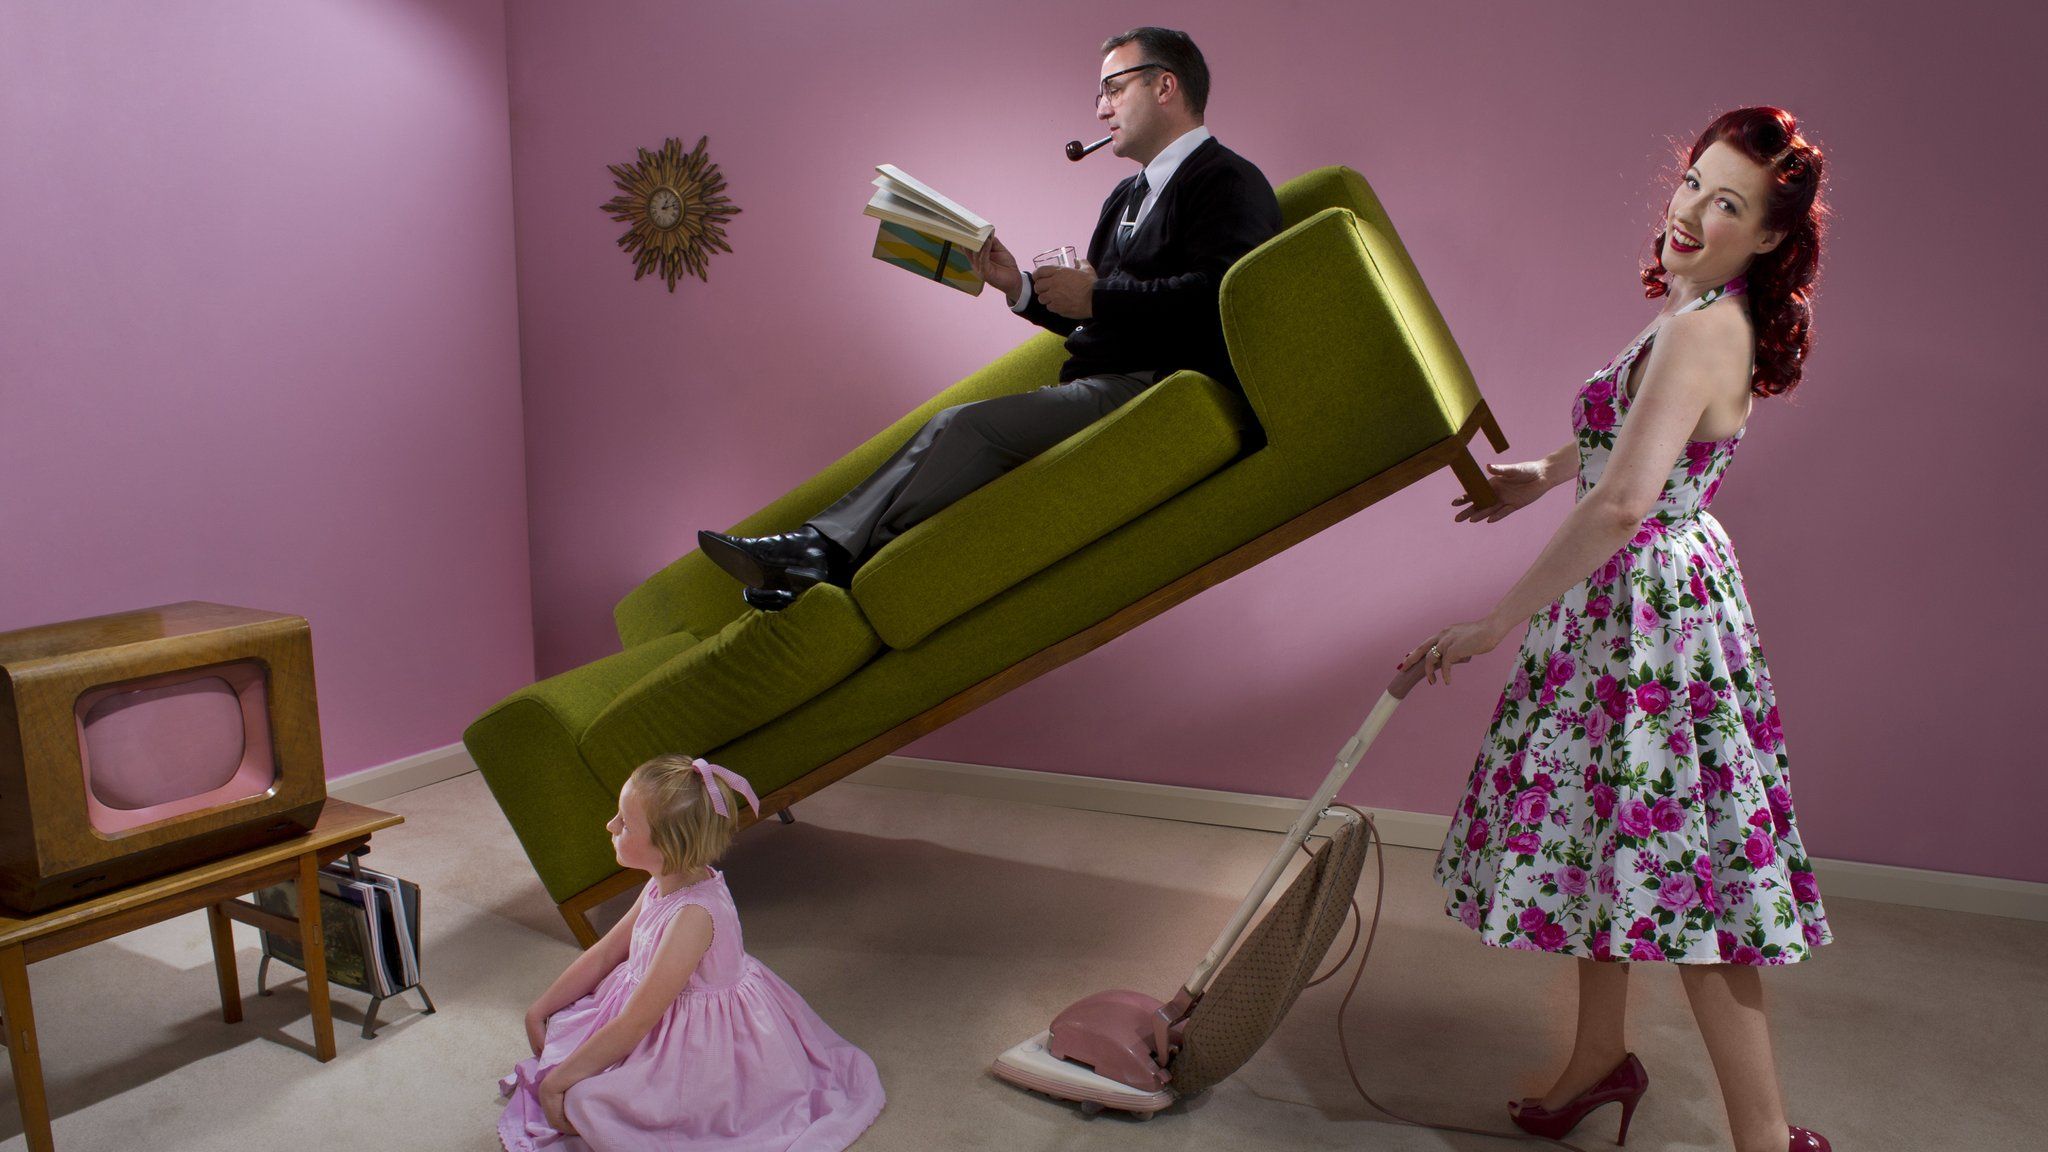 1950s stereotypical housewife uses vacuum cleaner while holding up her husband who's lying on sofa